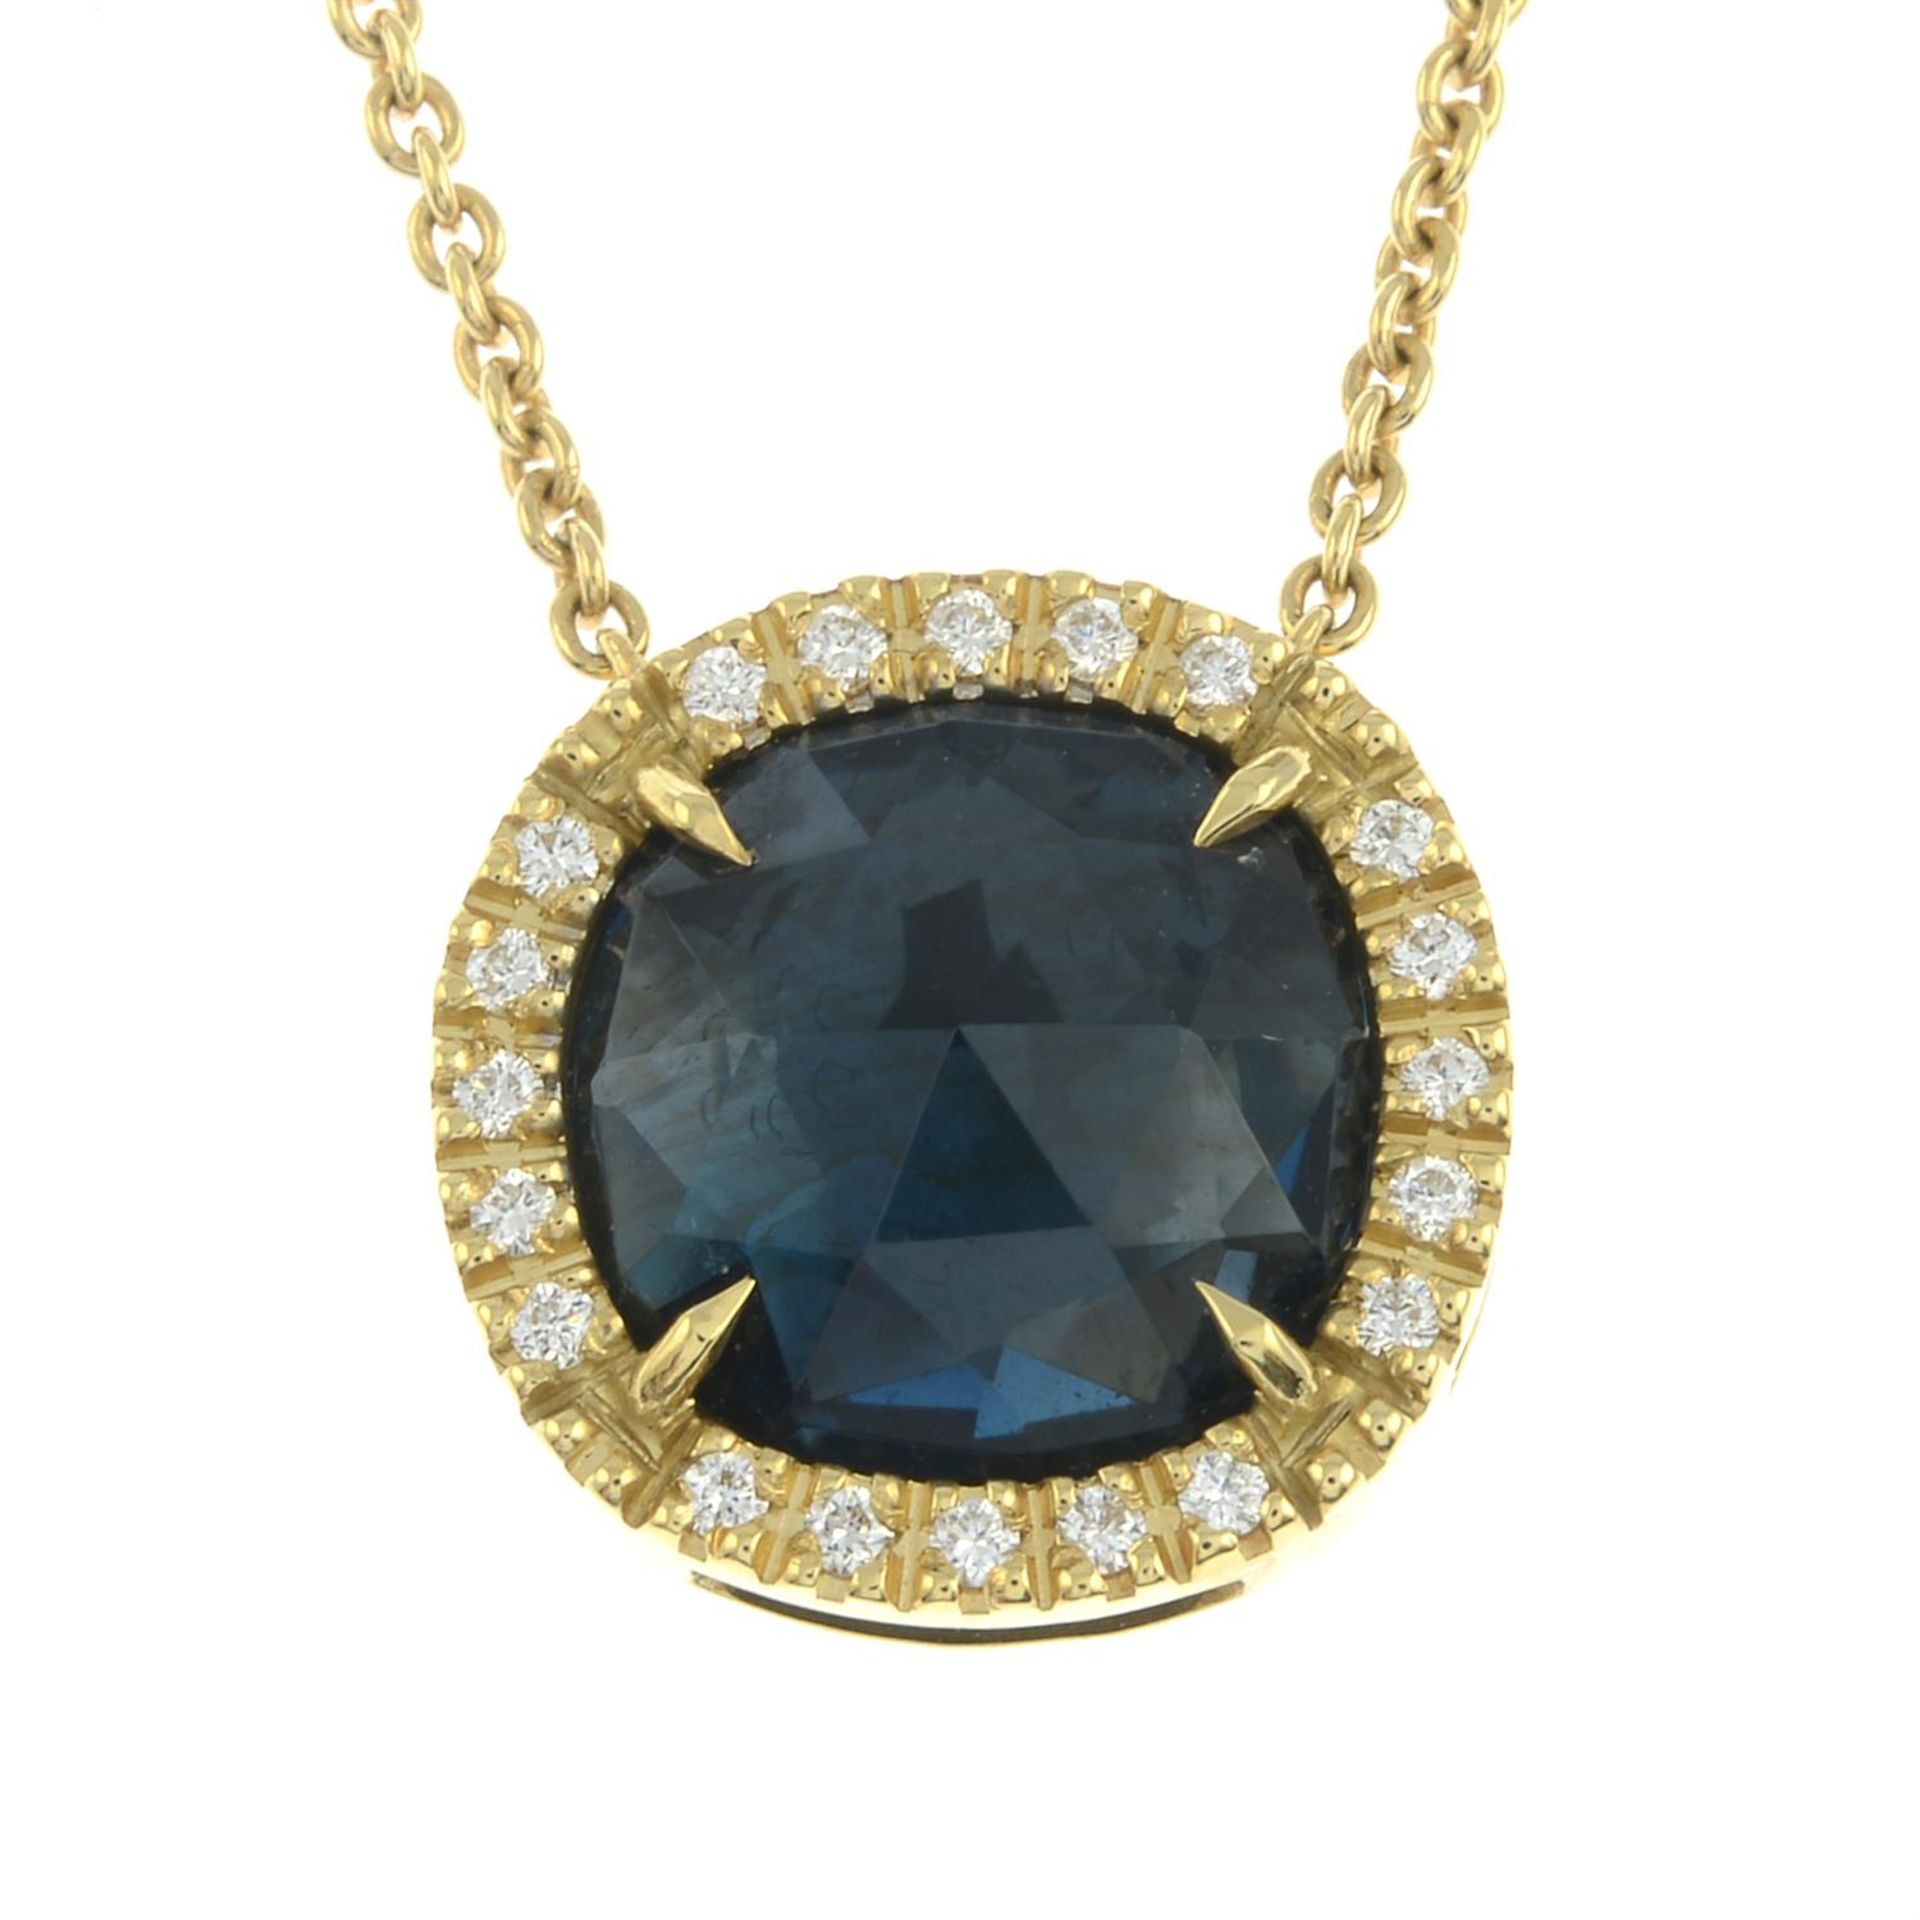 A topaz and diamond pendant and chain, by Marco Bicego.